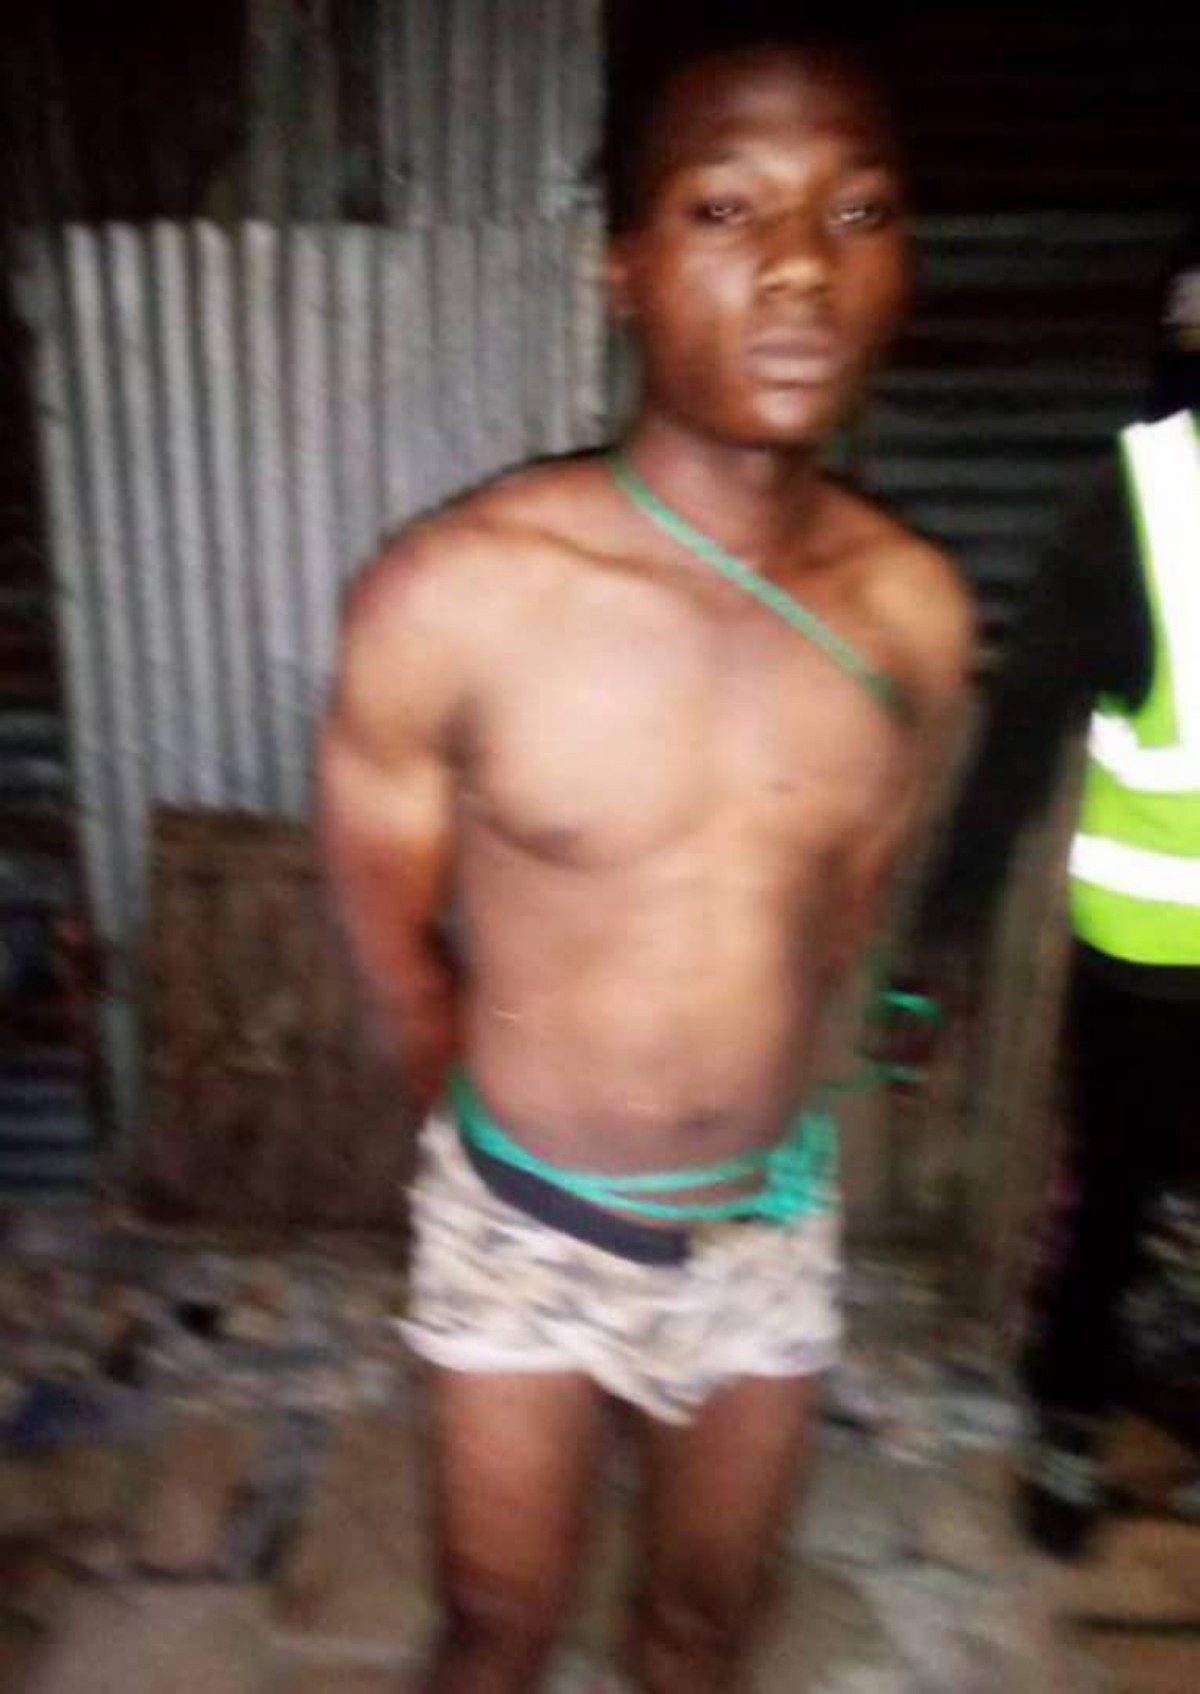 Young Man Caught On Underwear While Stealing Clothes In Local Community.